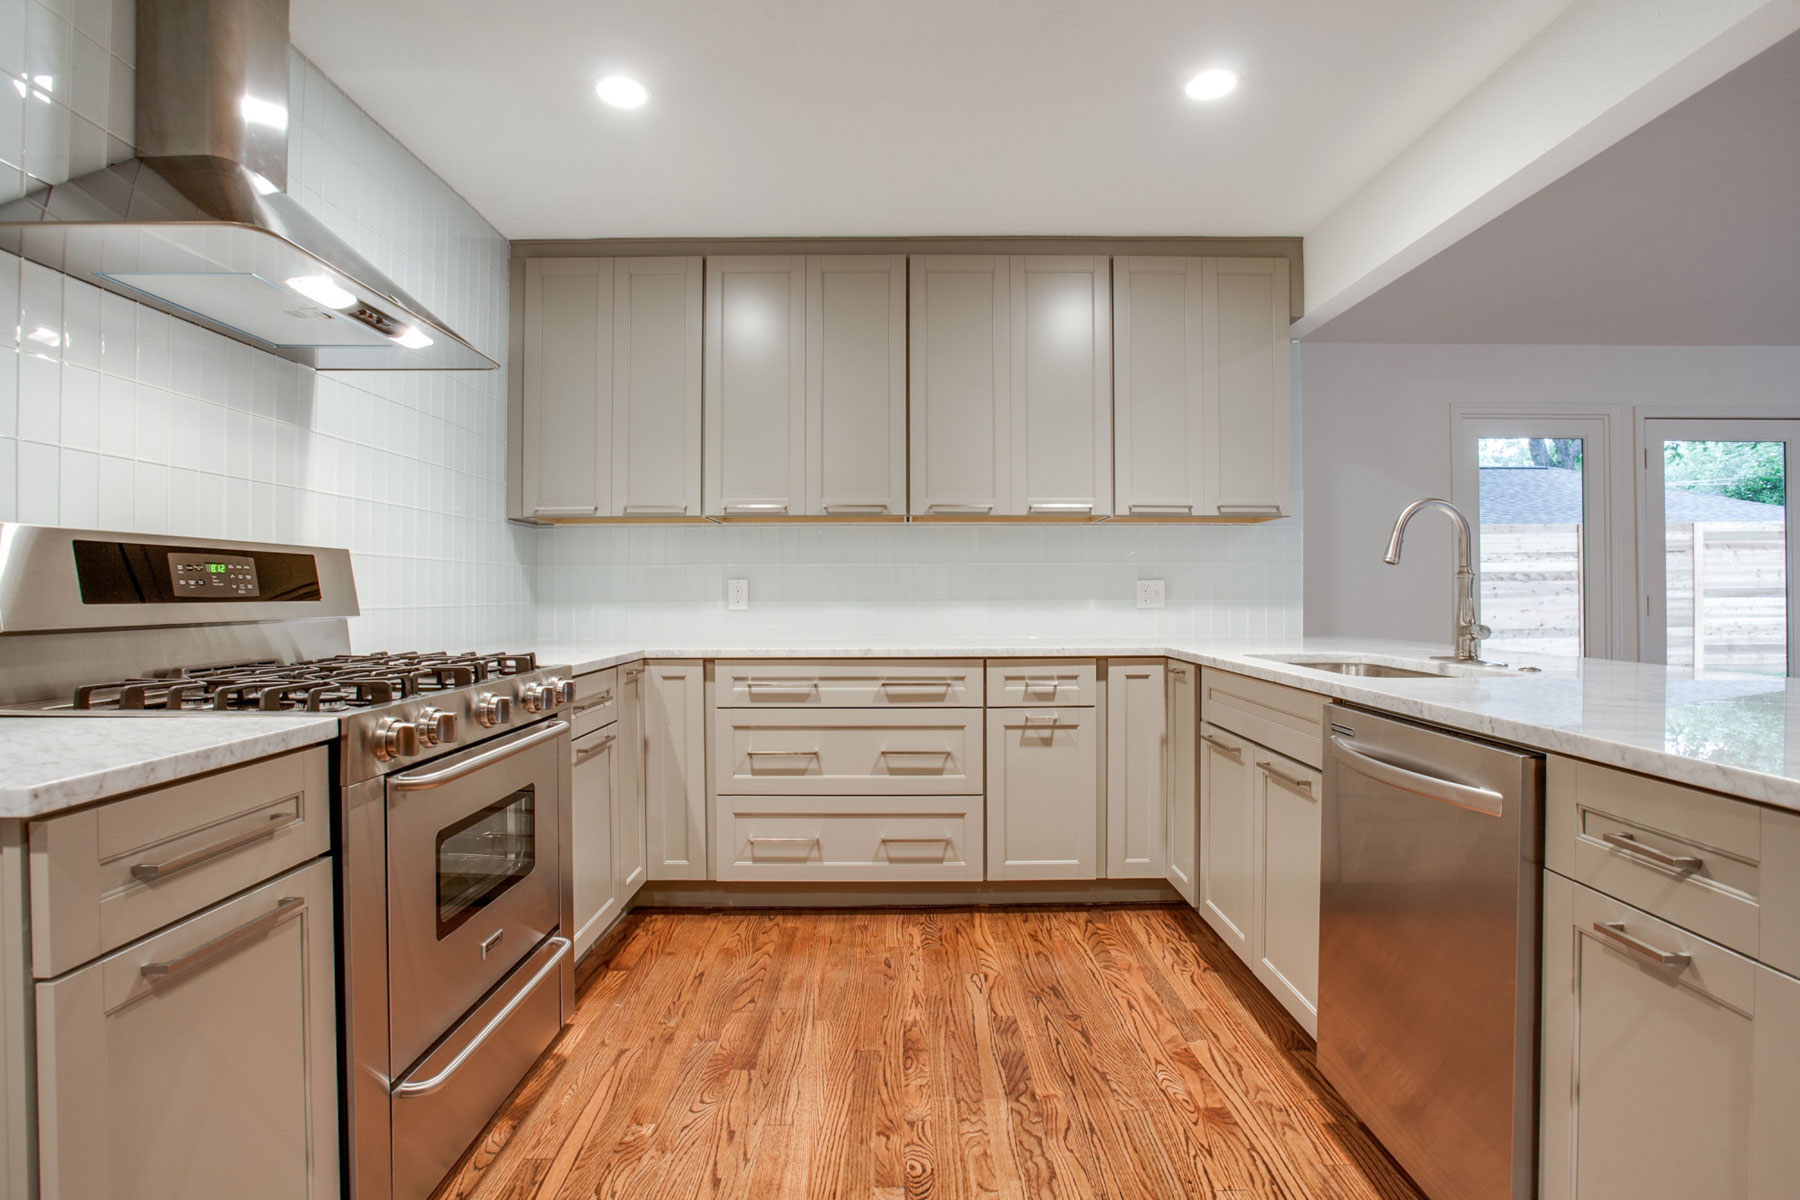 Wood Laminate With Breathtaking Wood Laminate Flooring Combined With White Furniture Completed With Sectional Cupboard Furnished With Sink And Oven Range With Countertop Interior Design Wood Laminate Flooring Design In Home Interior